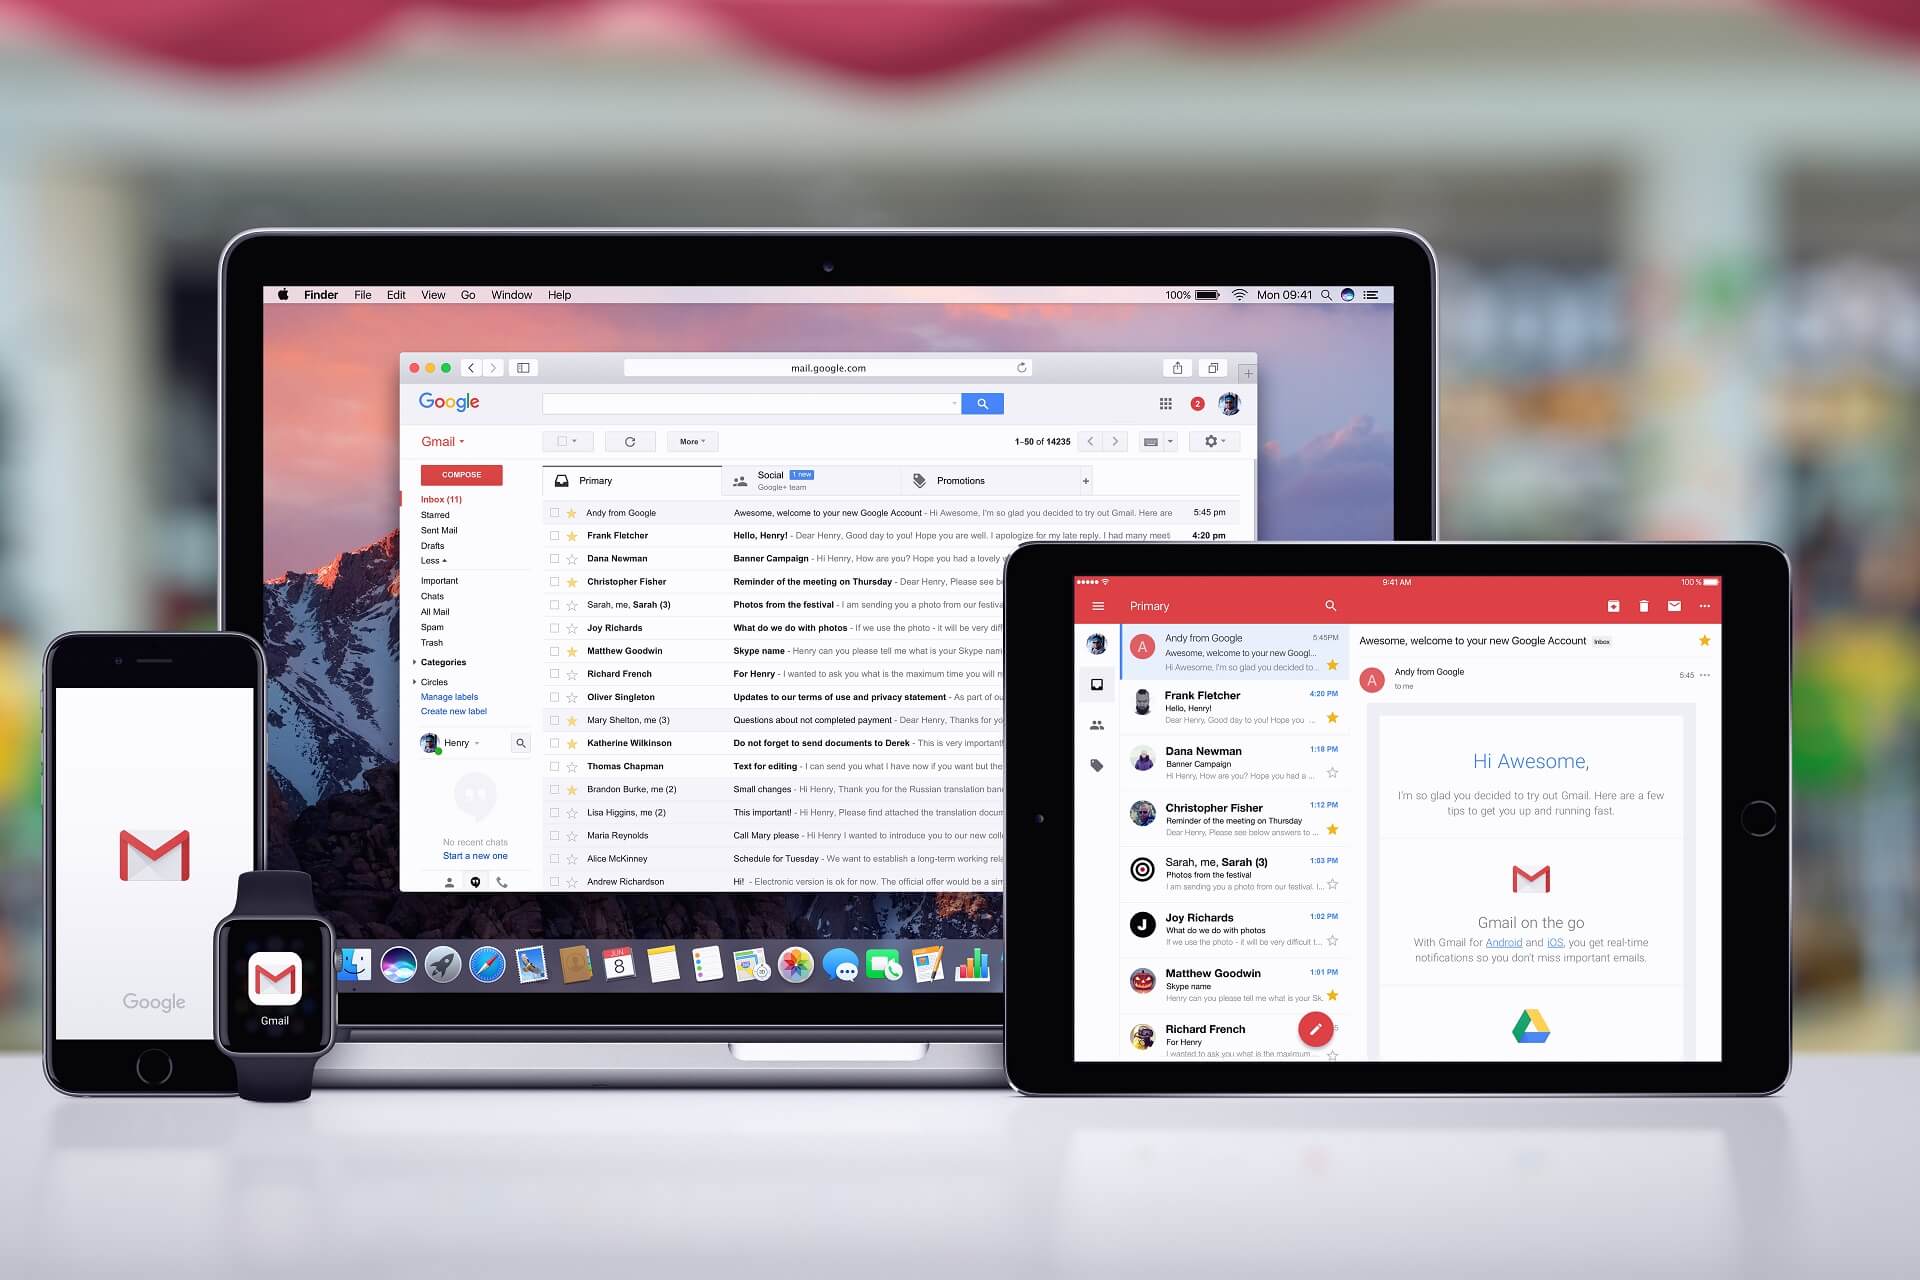 How To Stop Gmail Sent Mail From Appearing In Your IPhone Inbox